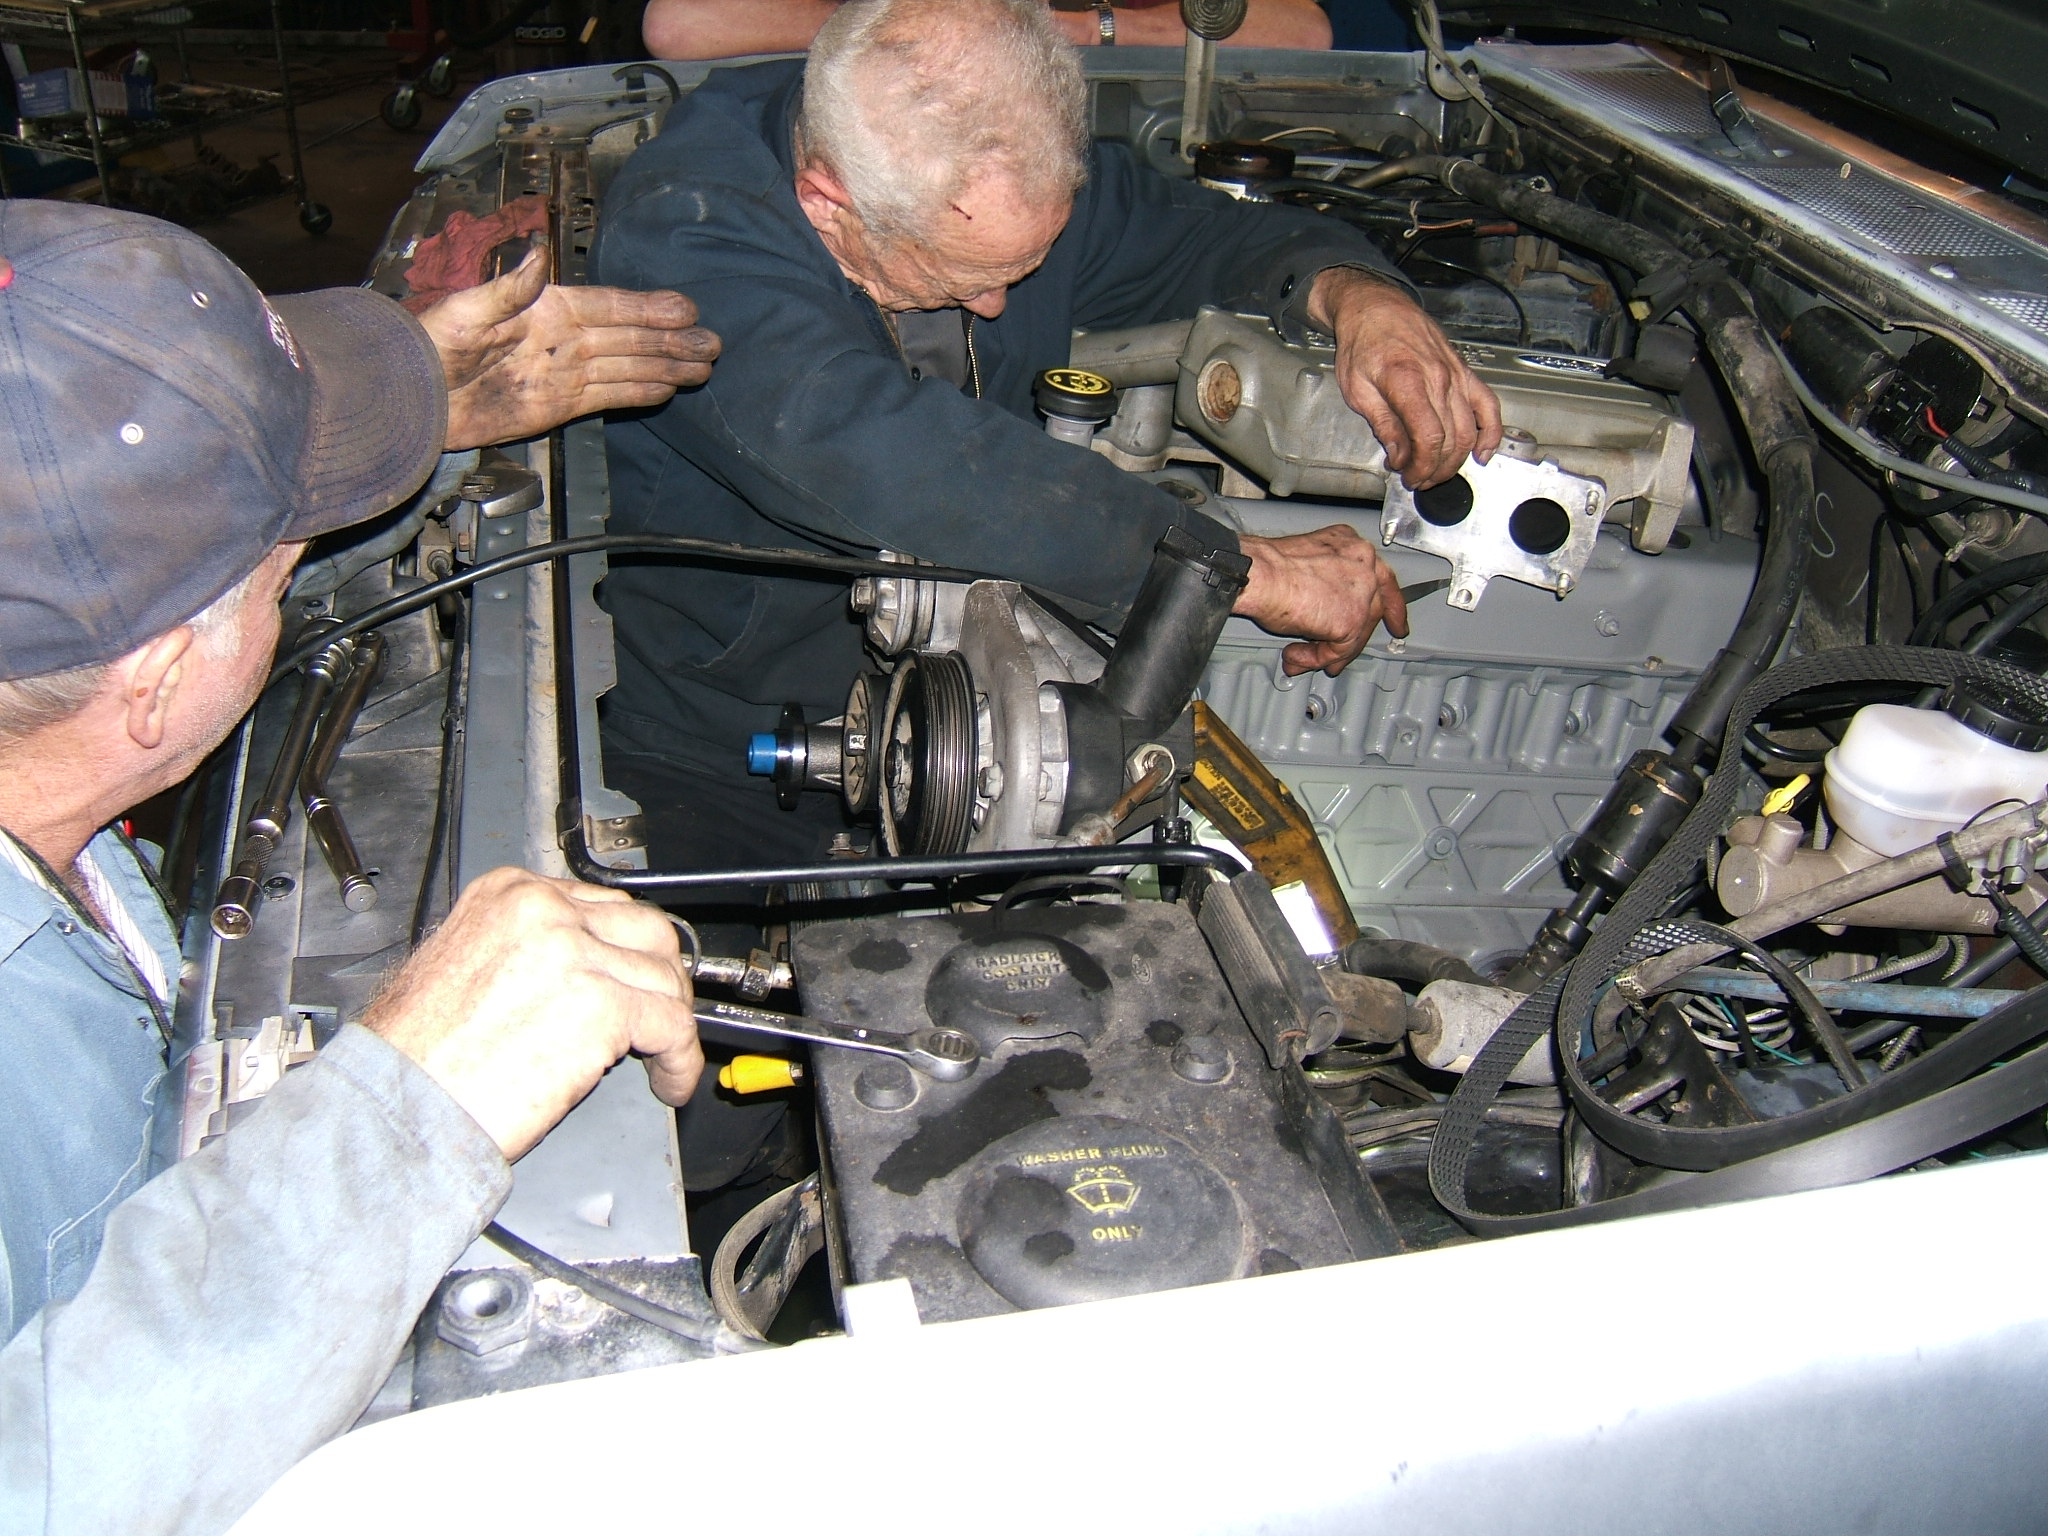 Engine being replaced